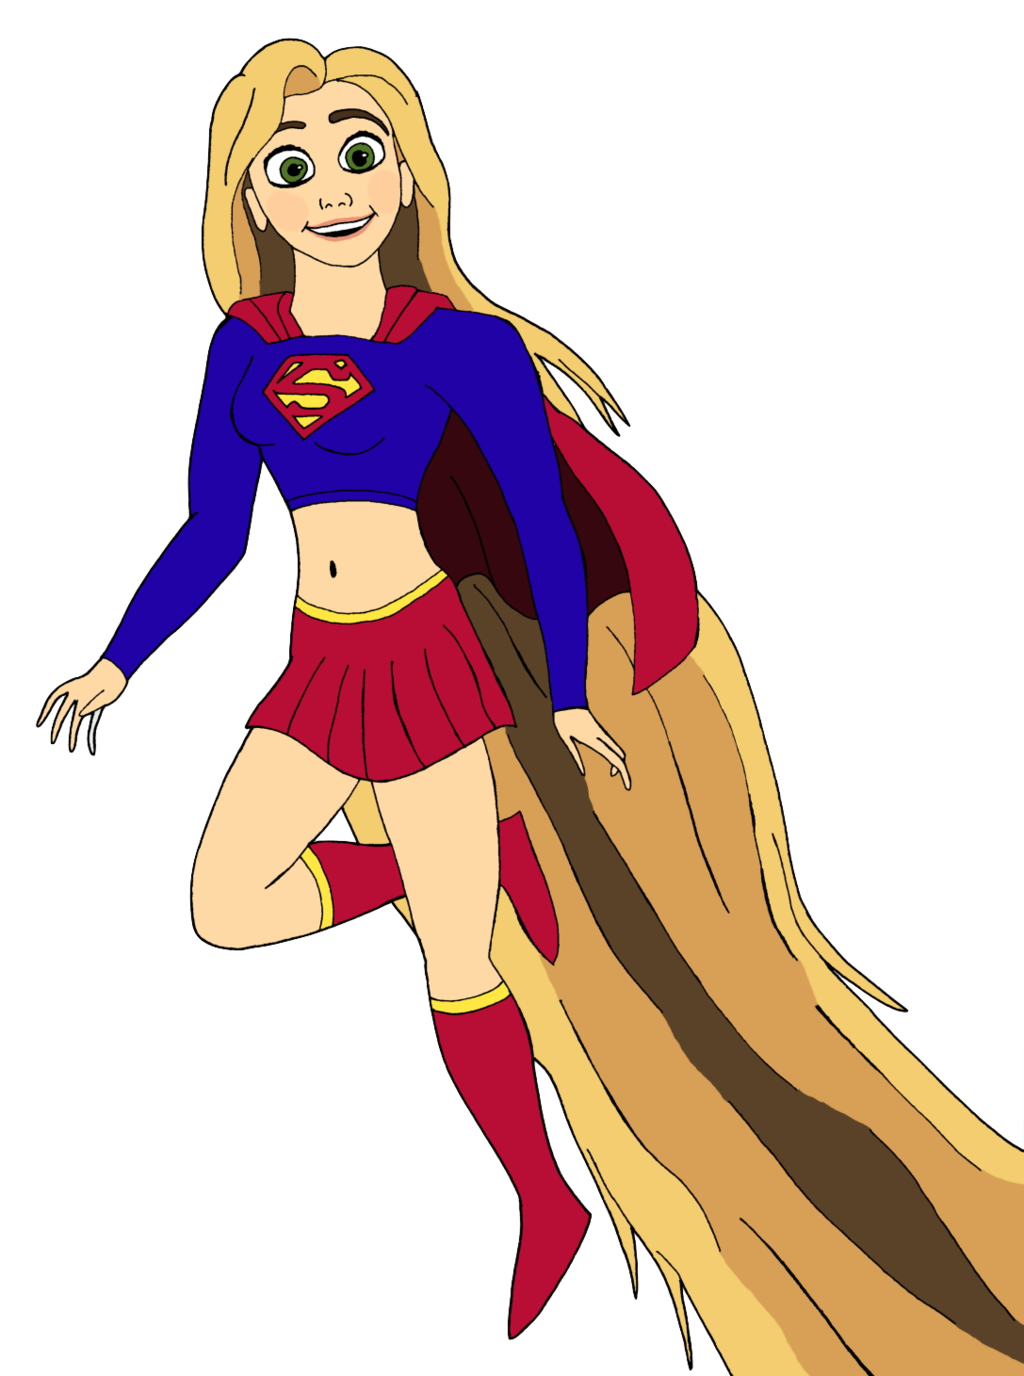 Image as supergirl by. Rapunzel clipart wiki